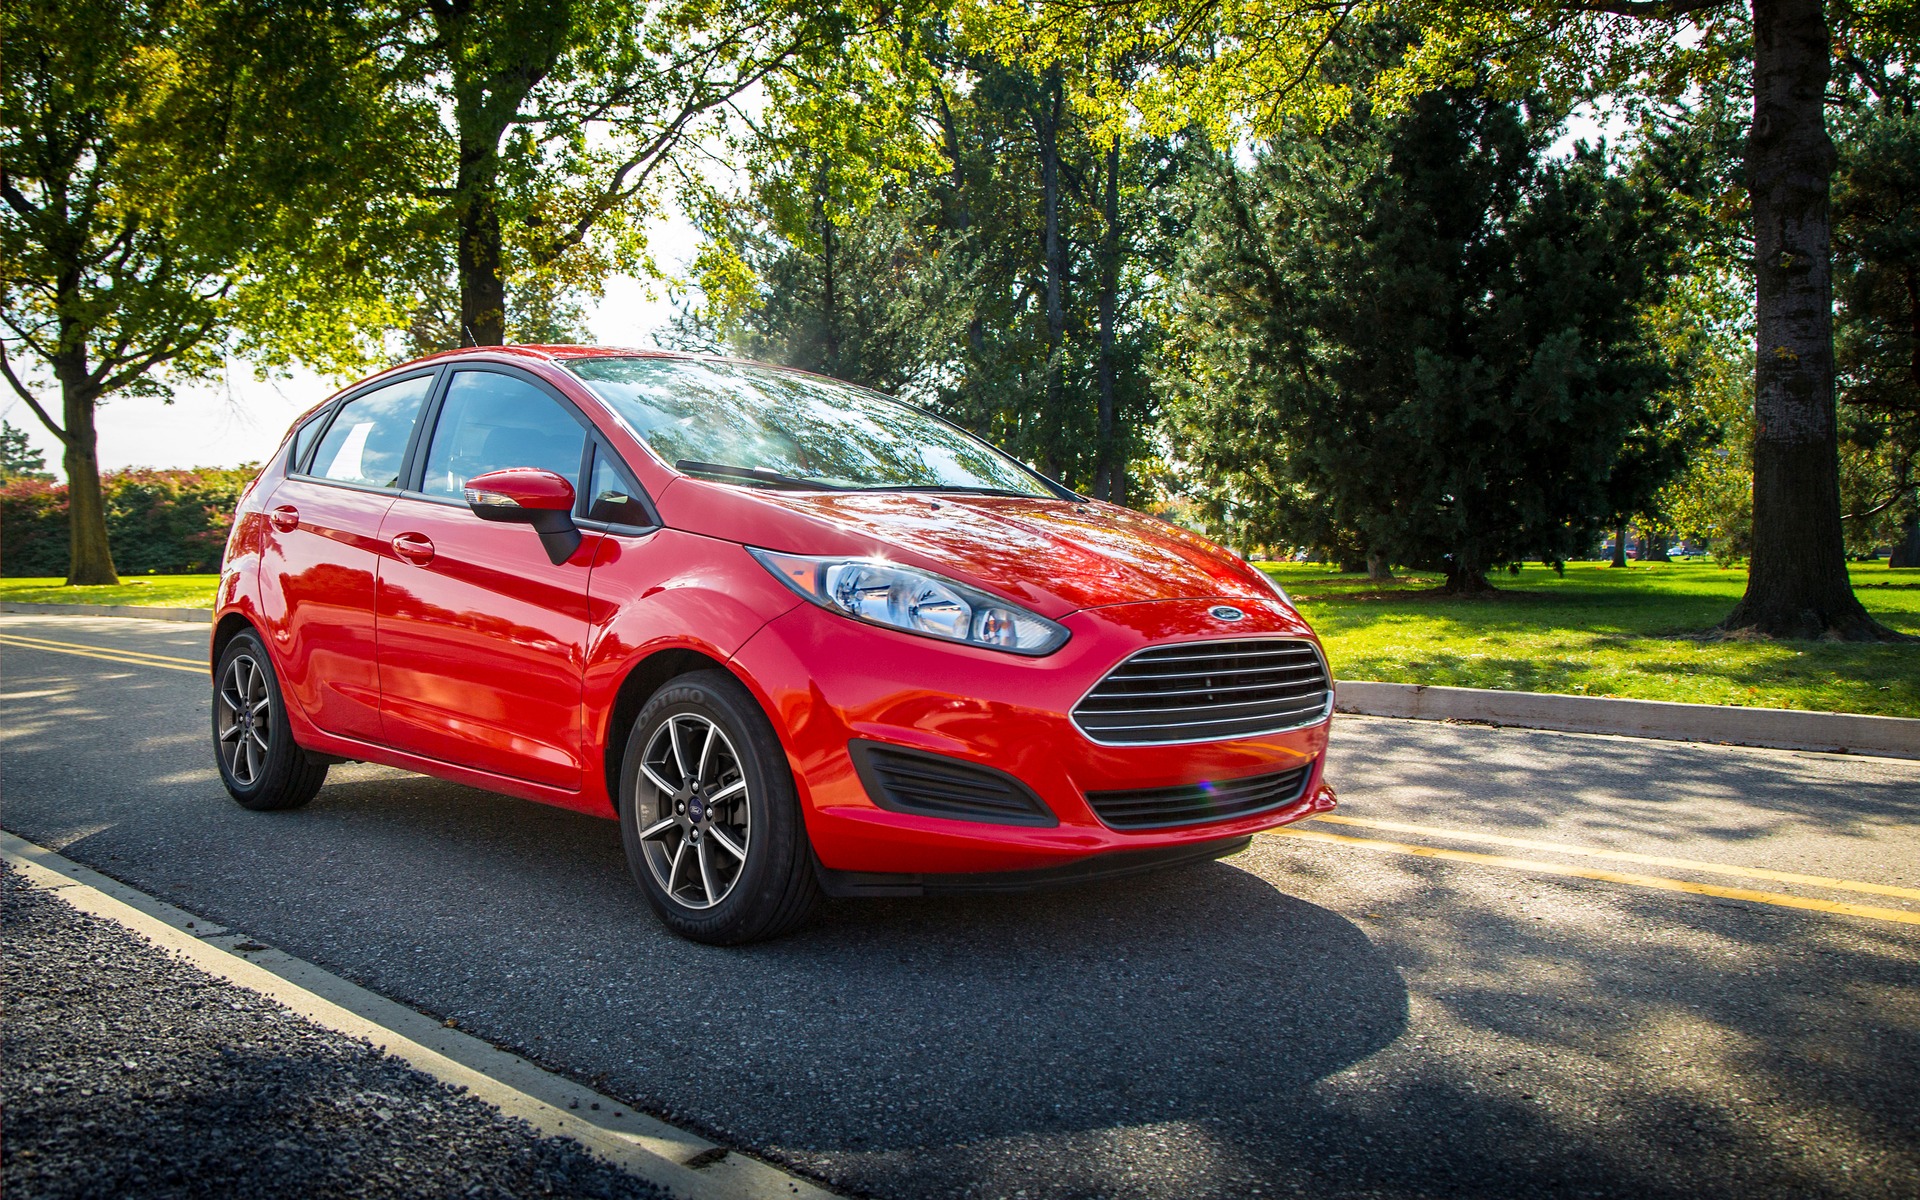 2018 Ford Fiesta Titanium Hatchback Price And Specifications The Car Guide